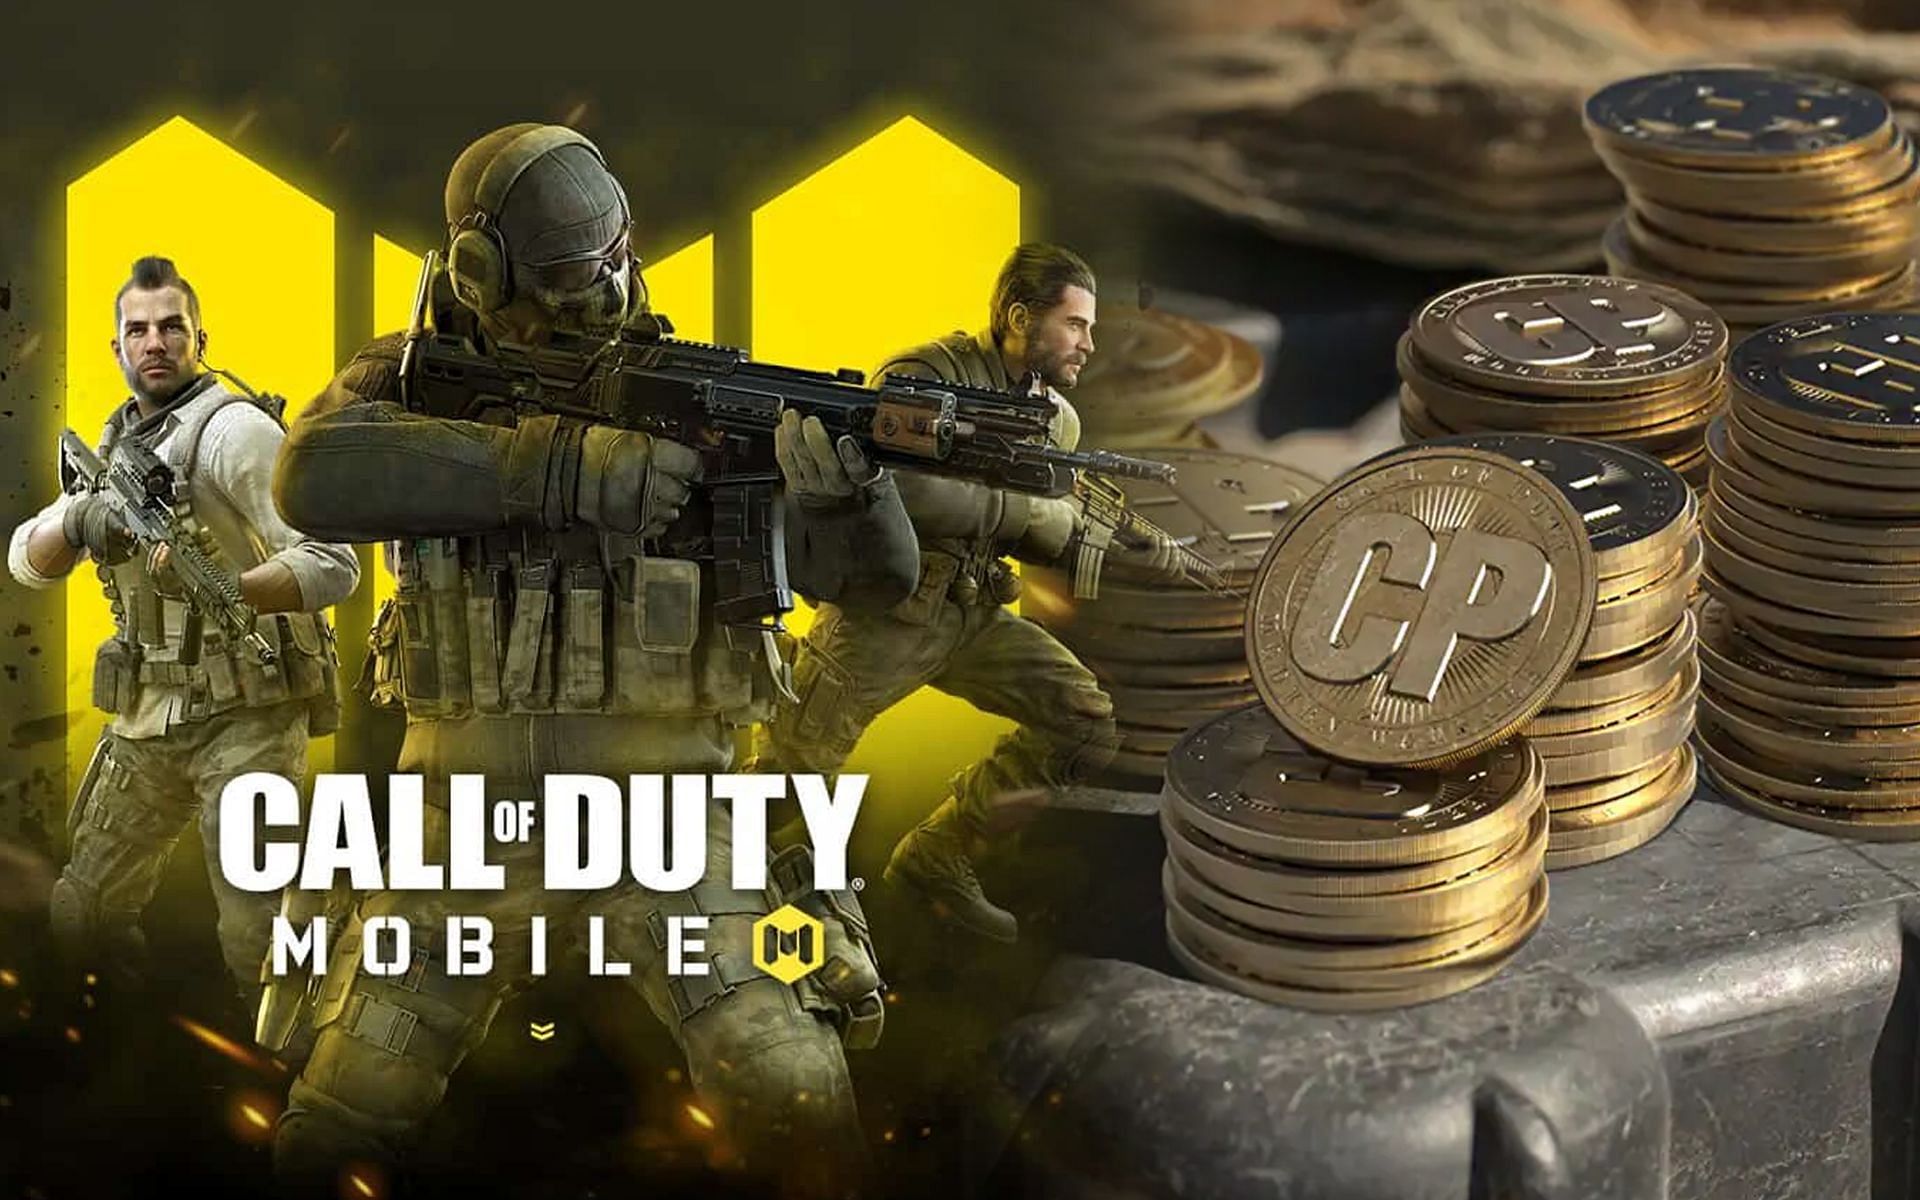 Call of Duty® Mobile: 10800 CoD Points